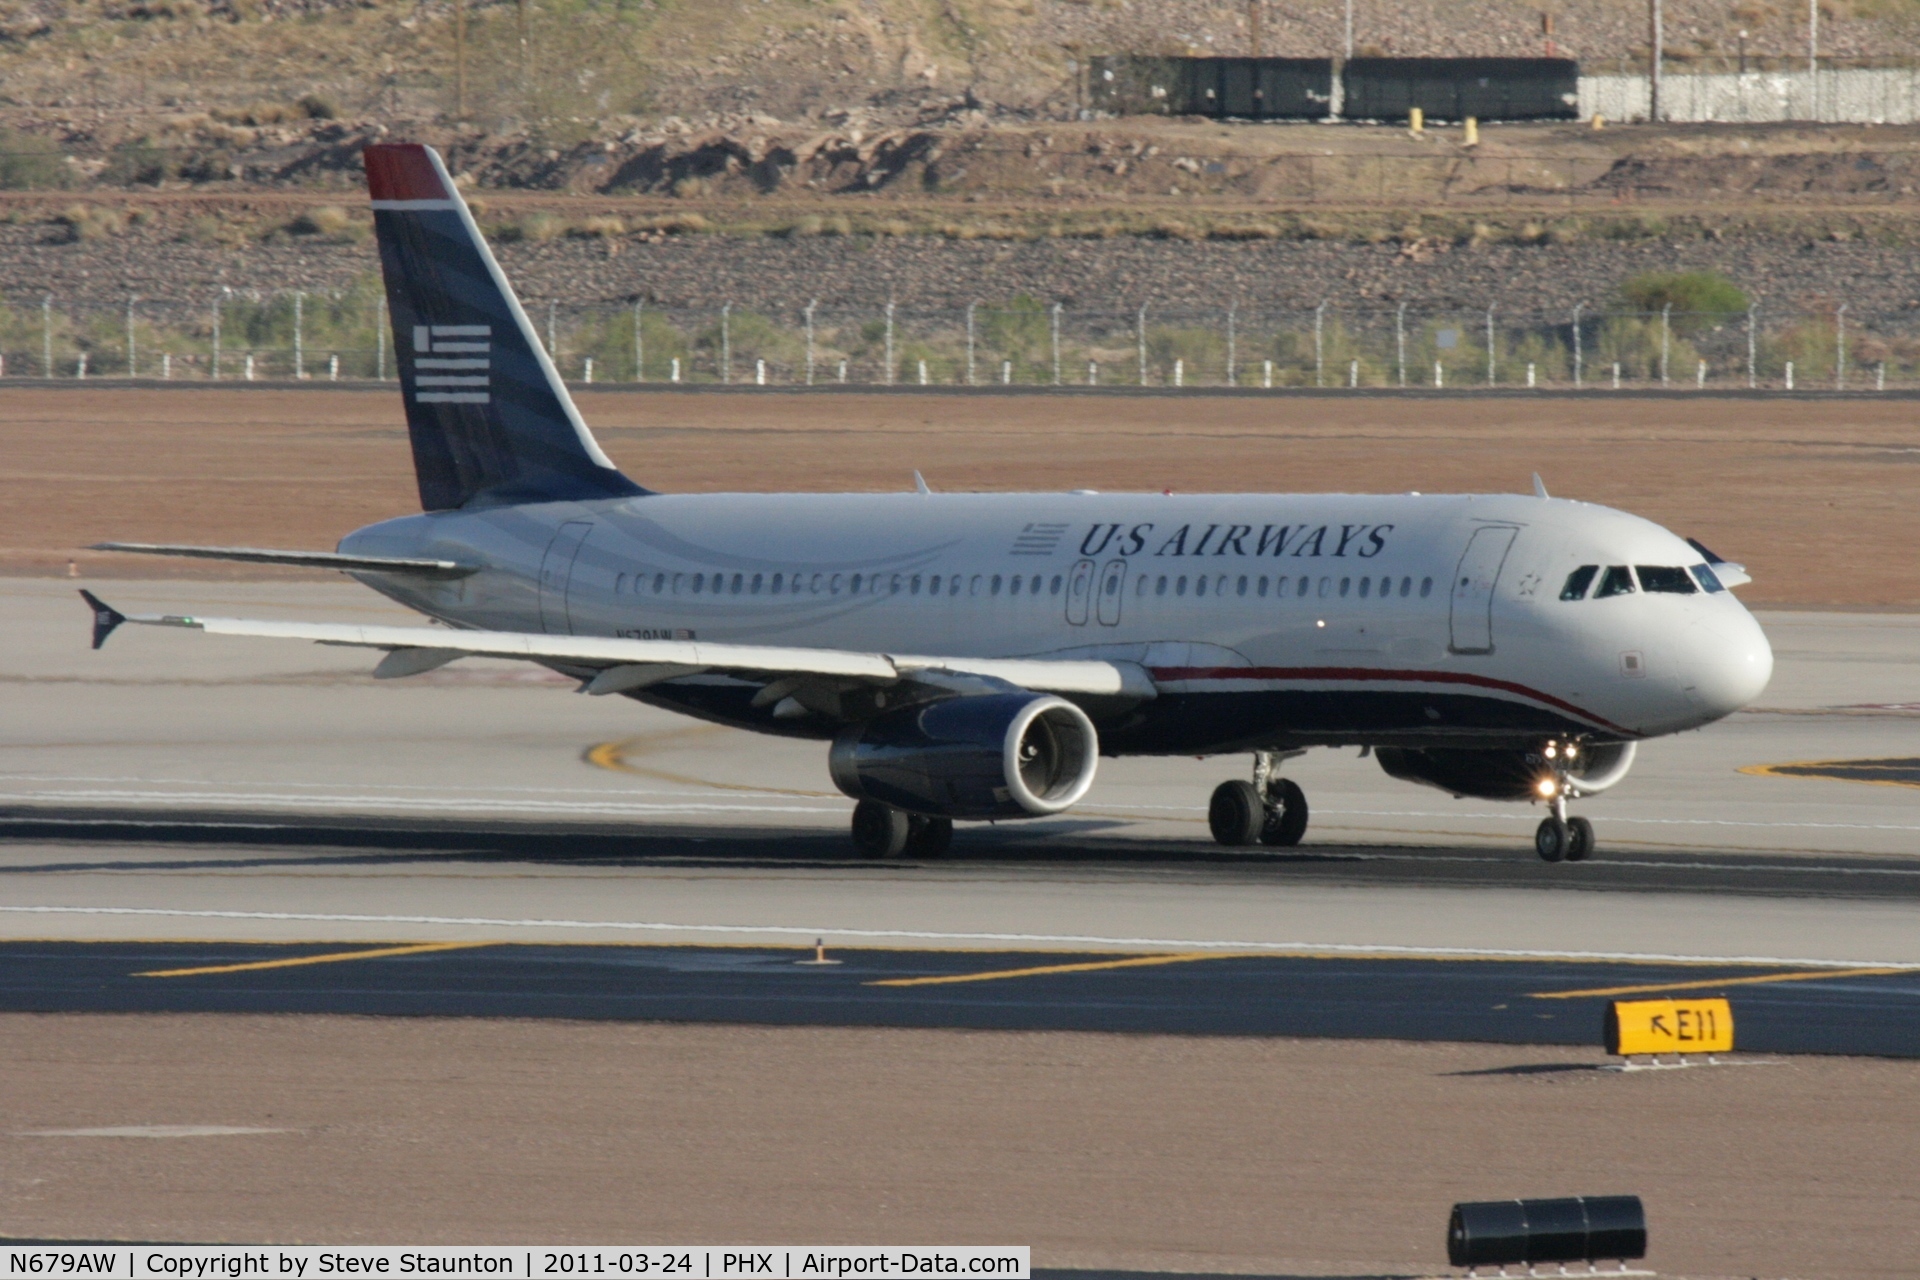 N679AW, 2005 Airbus A320-232 C/N 2613, Taken at Phoenix Sky Harbor Airport, in March 2011 whilst on an Aeroprint Aviation tour